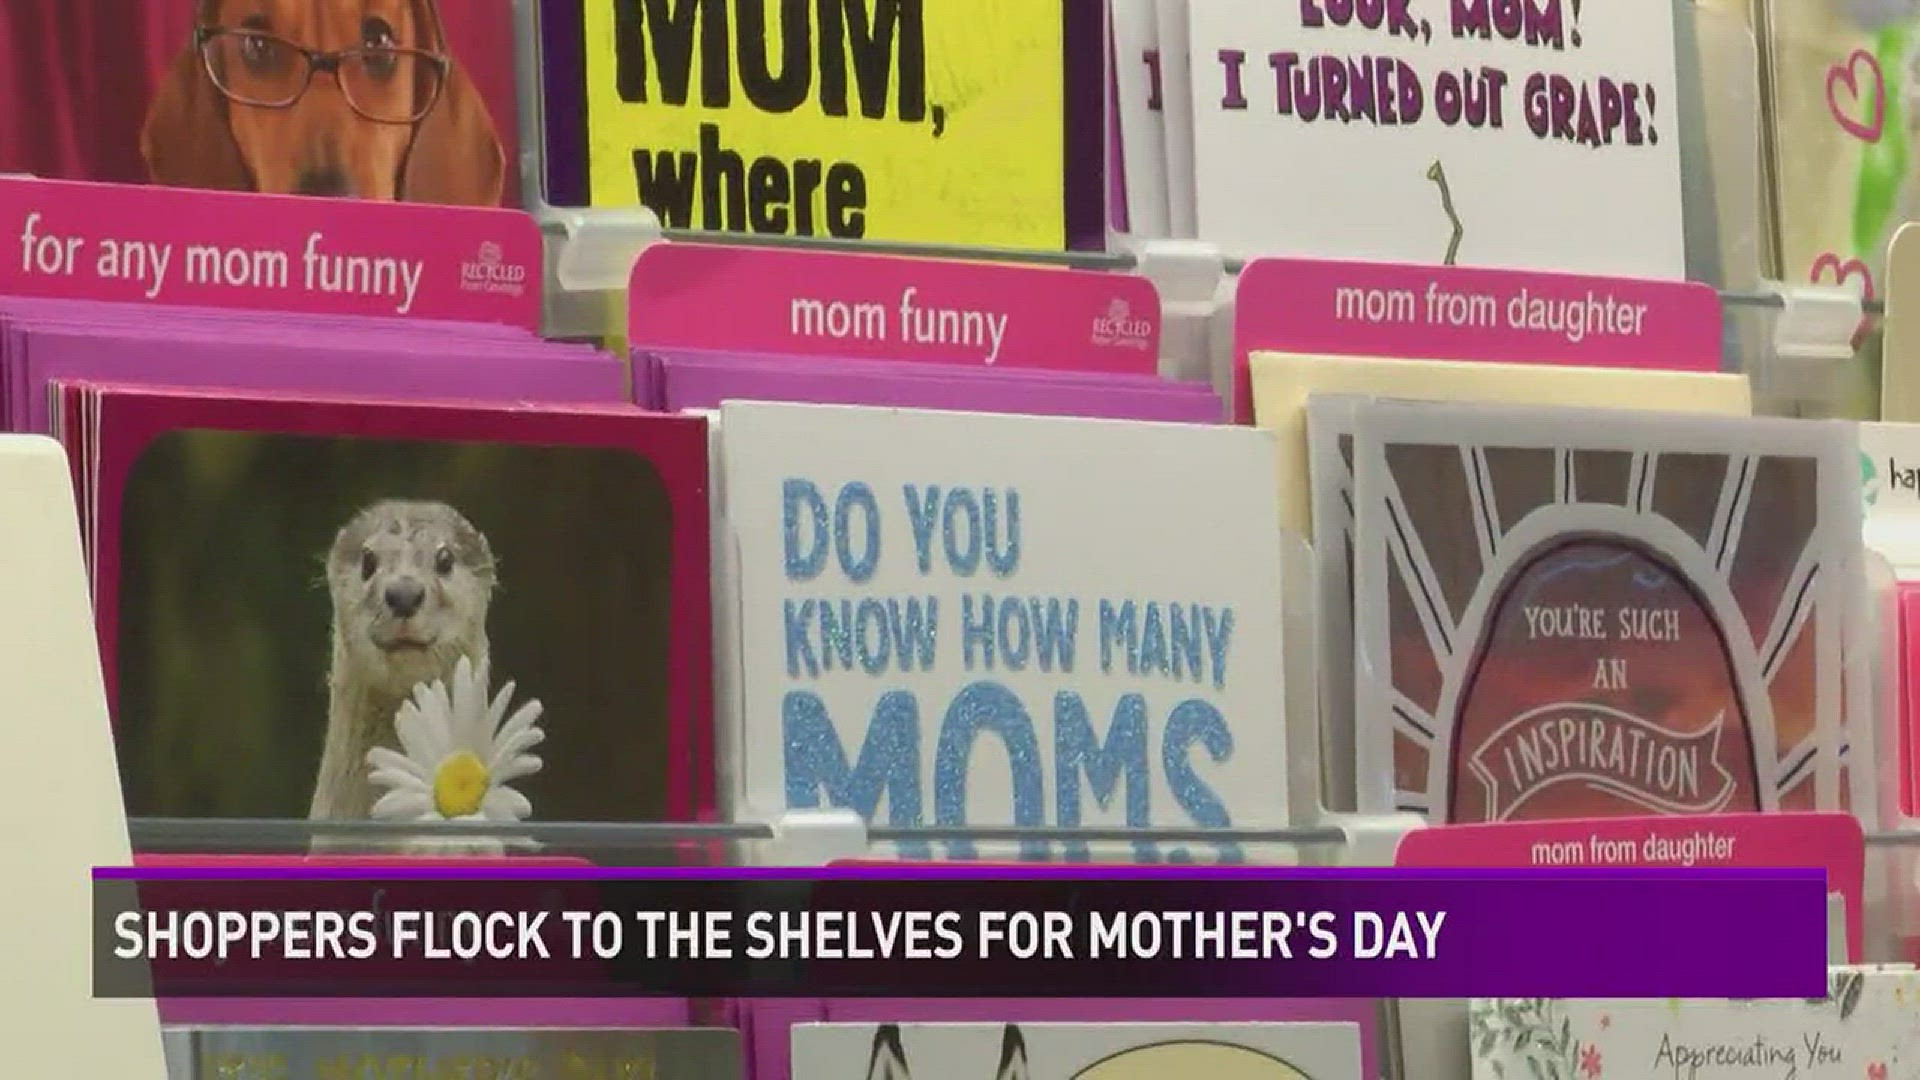 Consumers are saying they will spend more than ever on Mother's Day this year.